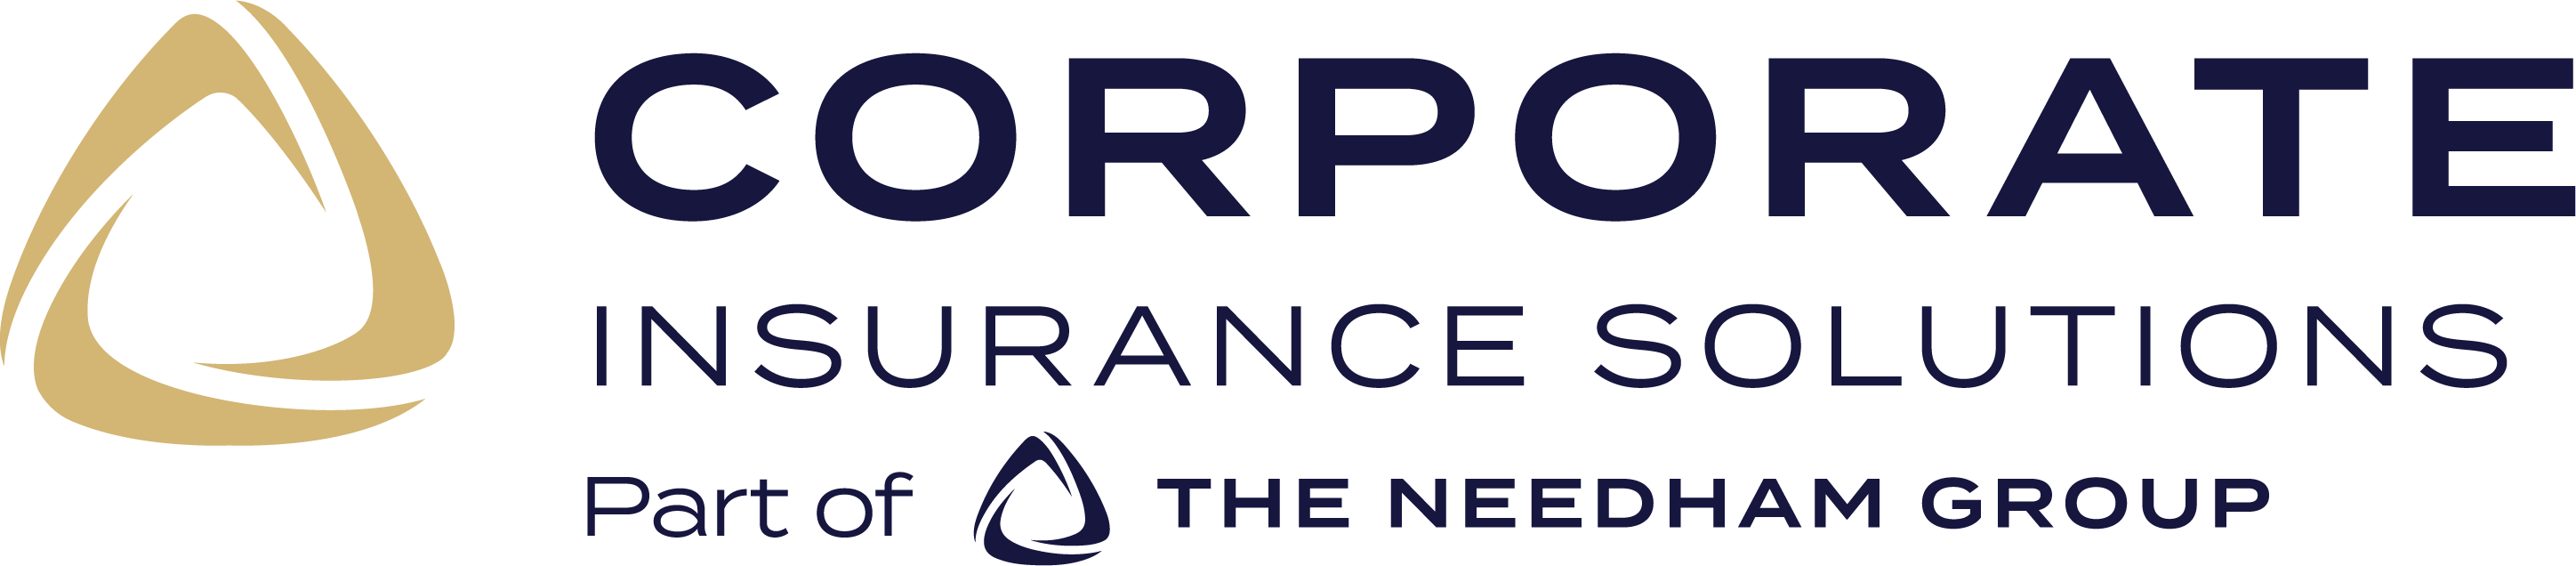 Corporate Insurance Solutions - part of the Needham Group